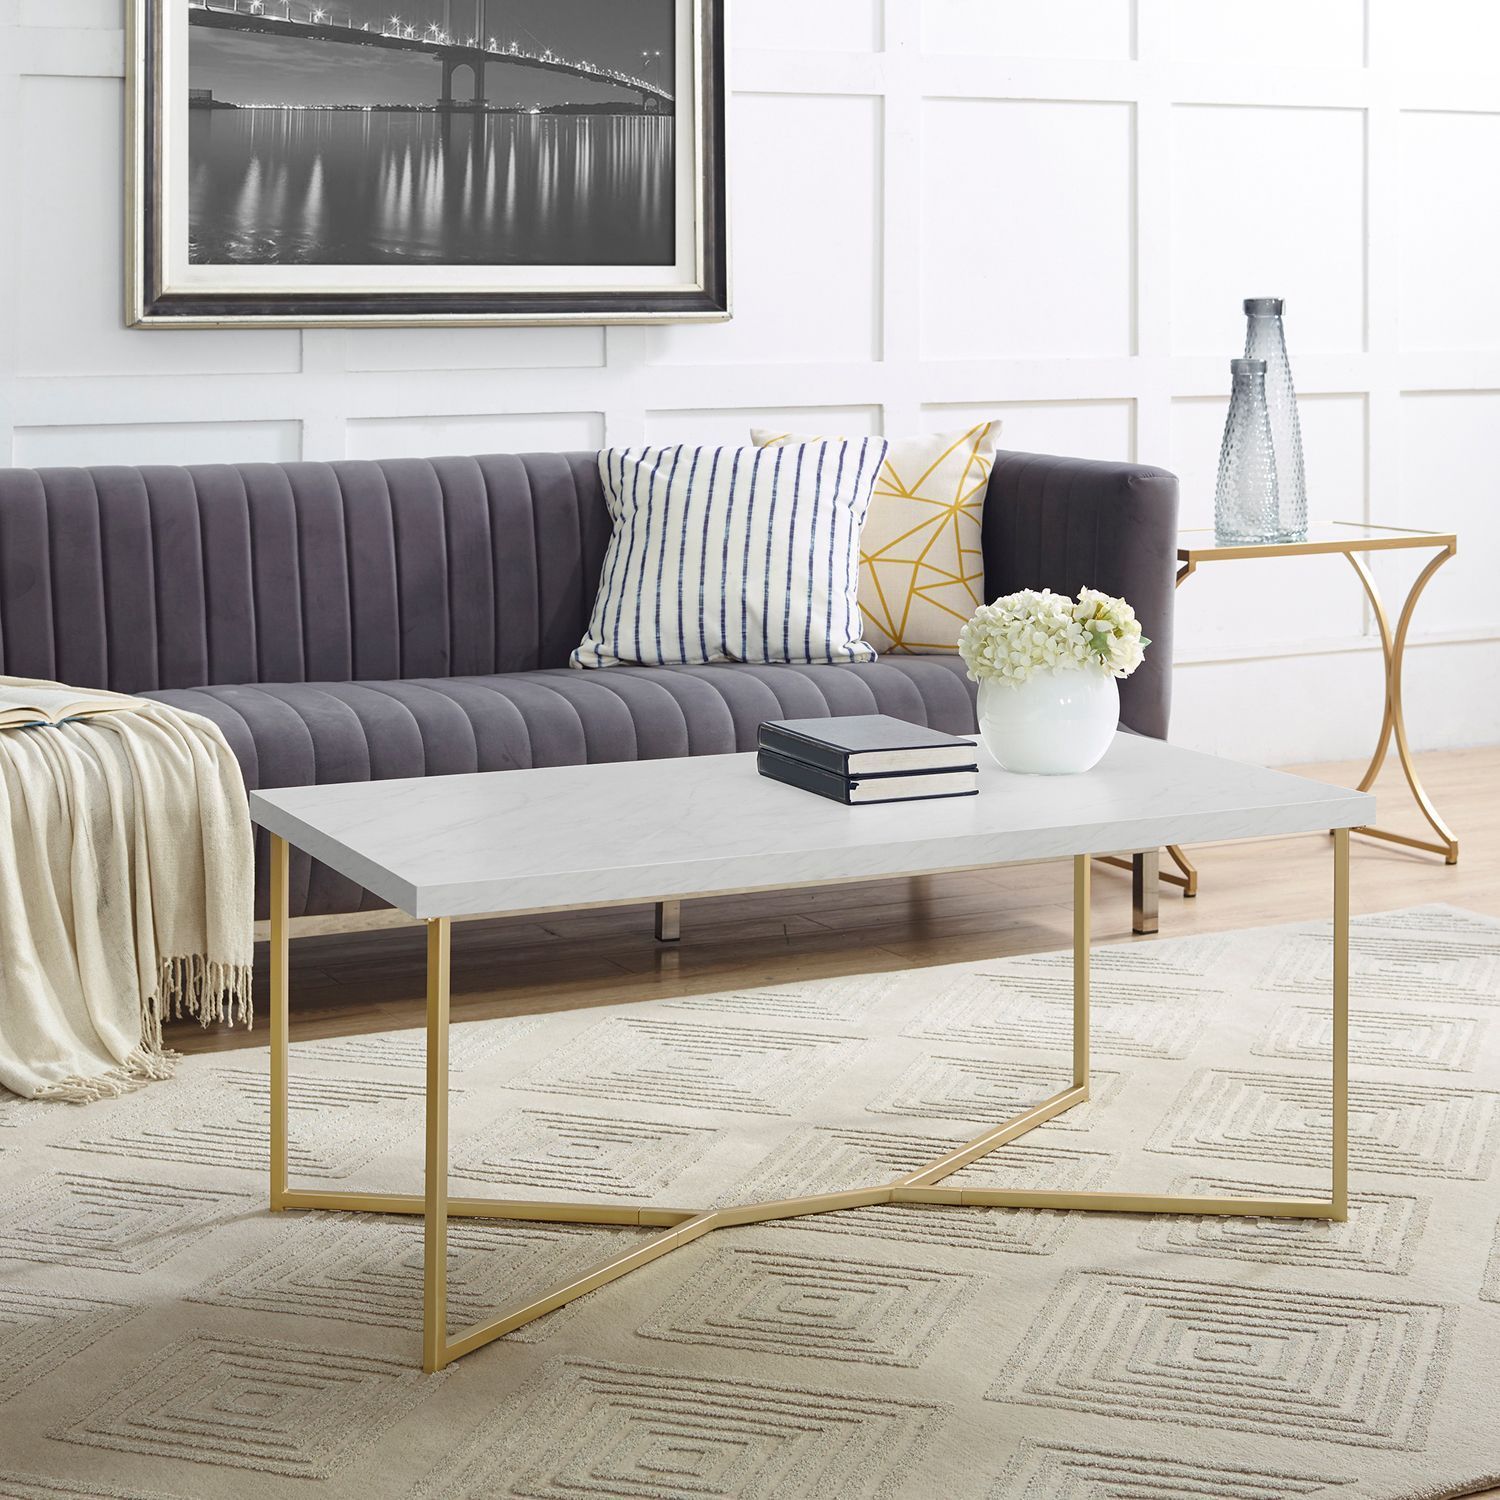 Faux Marble Y Leg Coffee Table With Gold Frame | Pier 1 For Cream And Gold Coffee Tables (View 4 of 15)